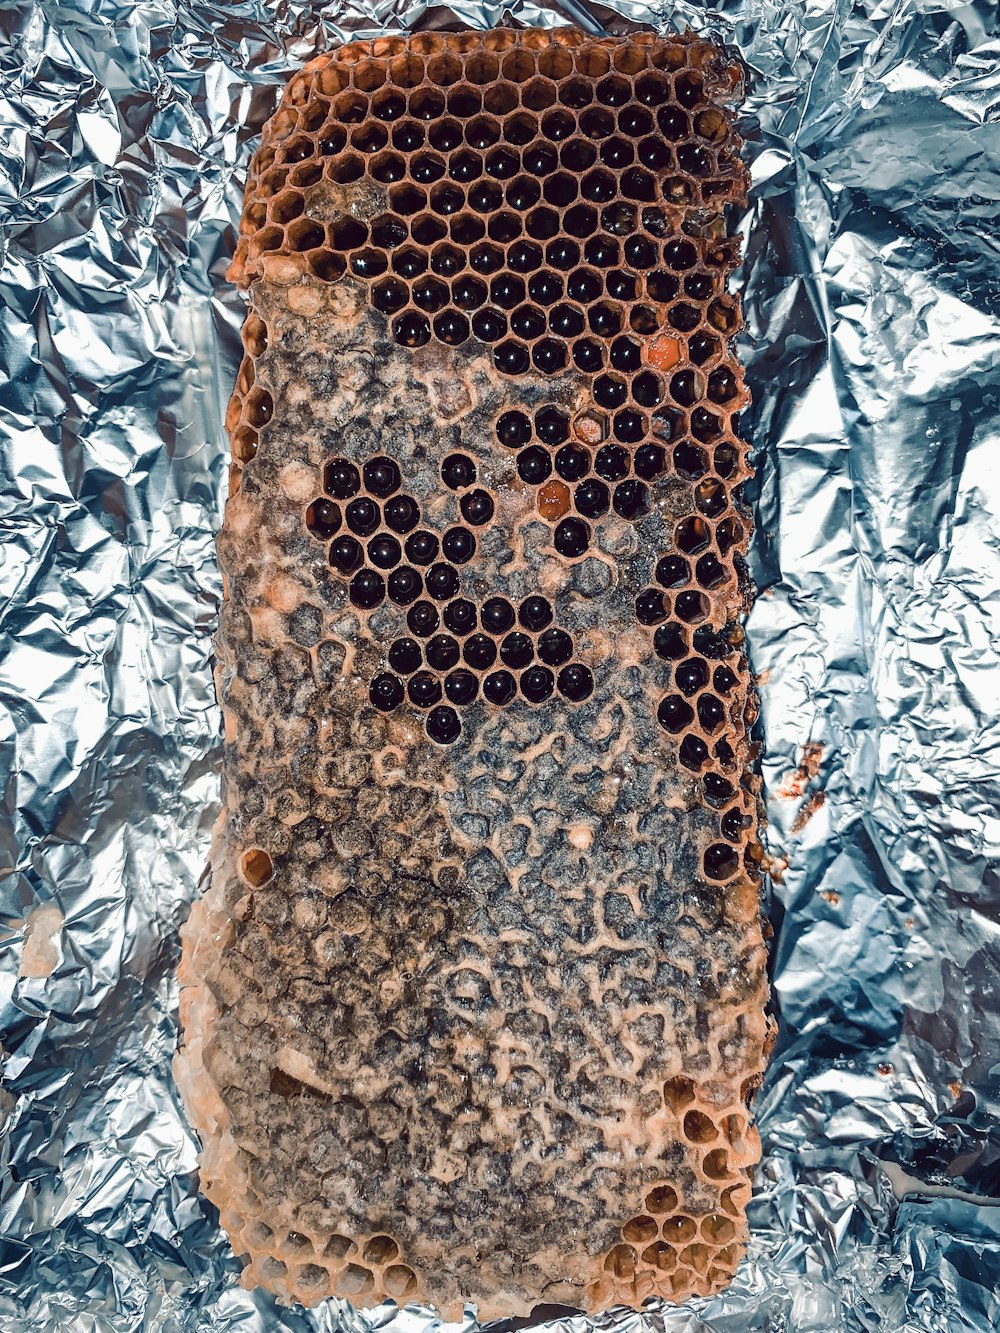 a beehive with a face drawn on it